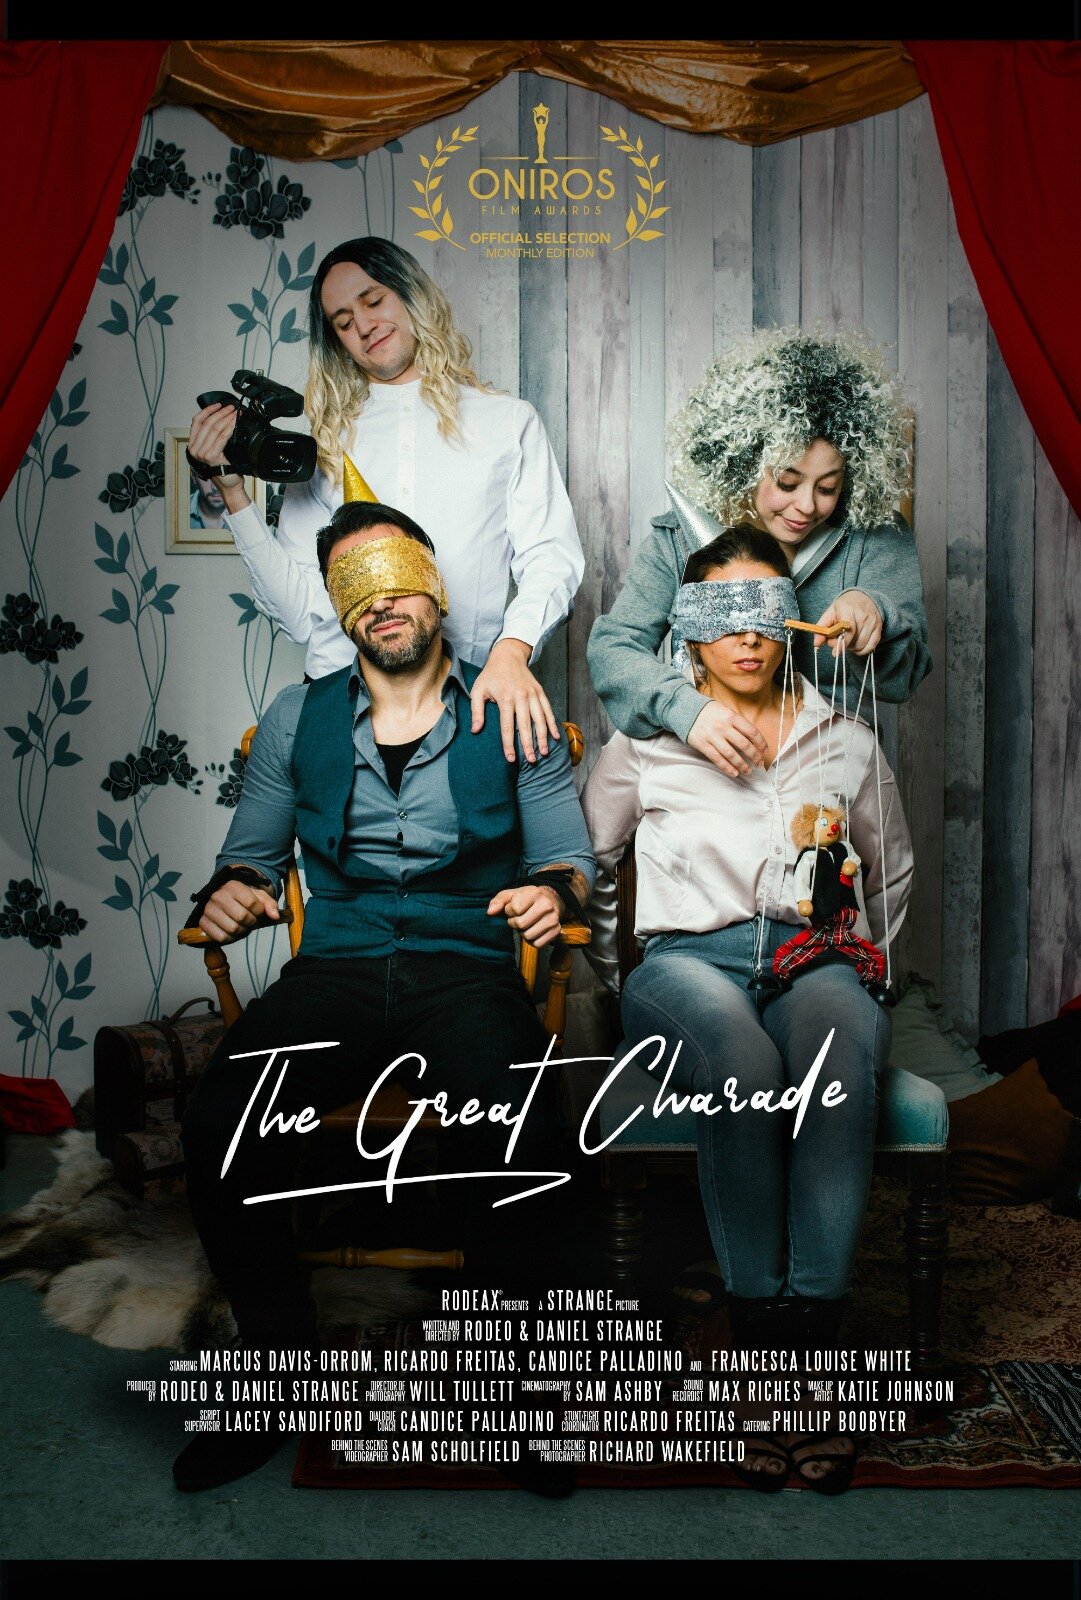 THE GREAT CHARADE - ASSOCIATE PRODUCER